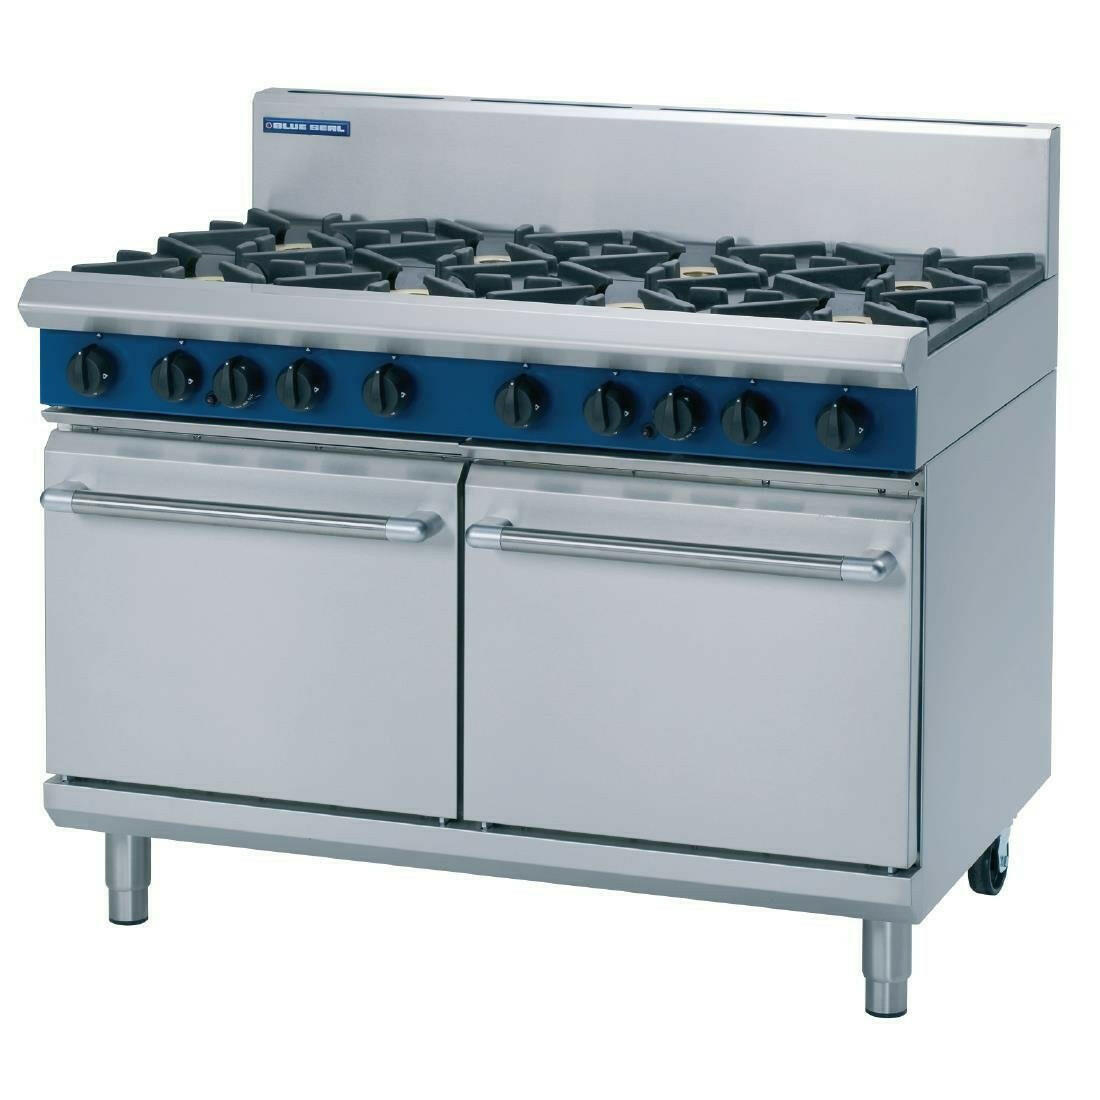 Blue Seal, 8 Burner, Double Oven, 1200mm Oven, Static Oven